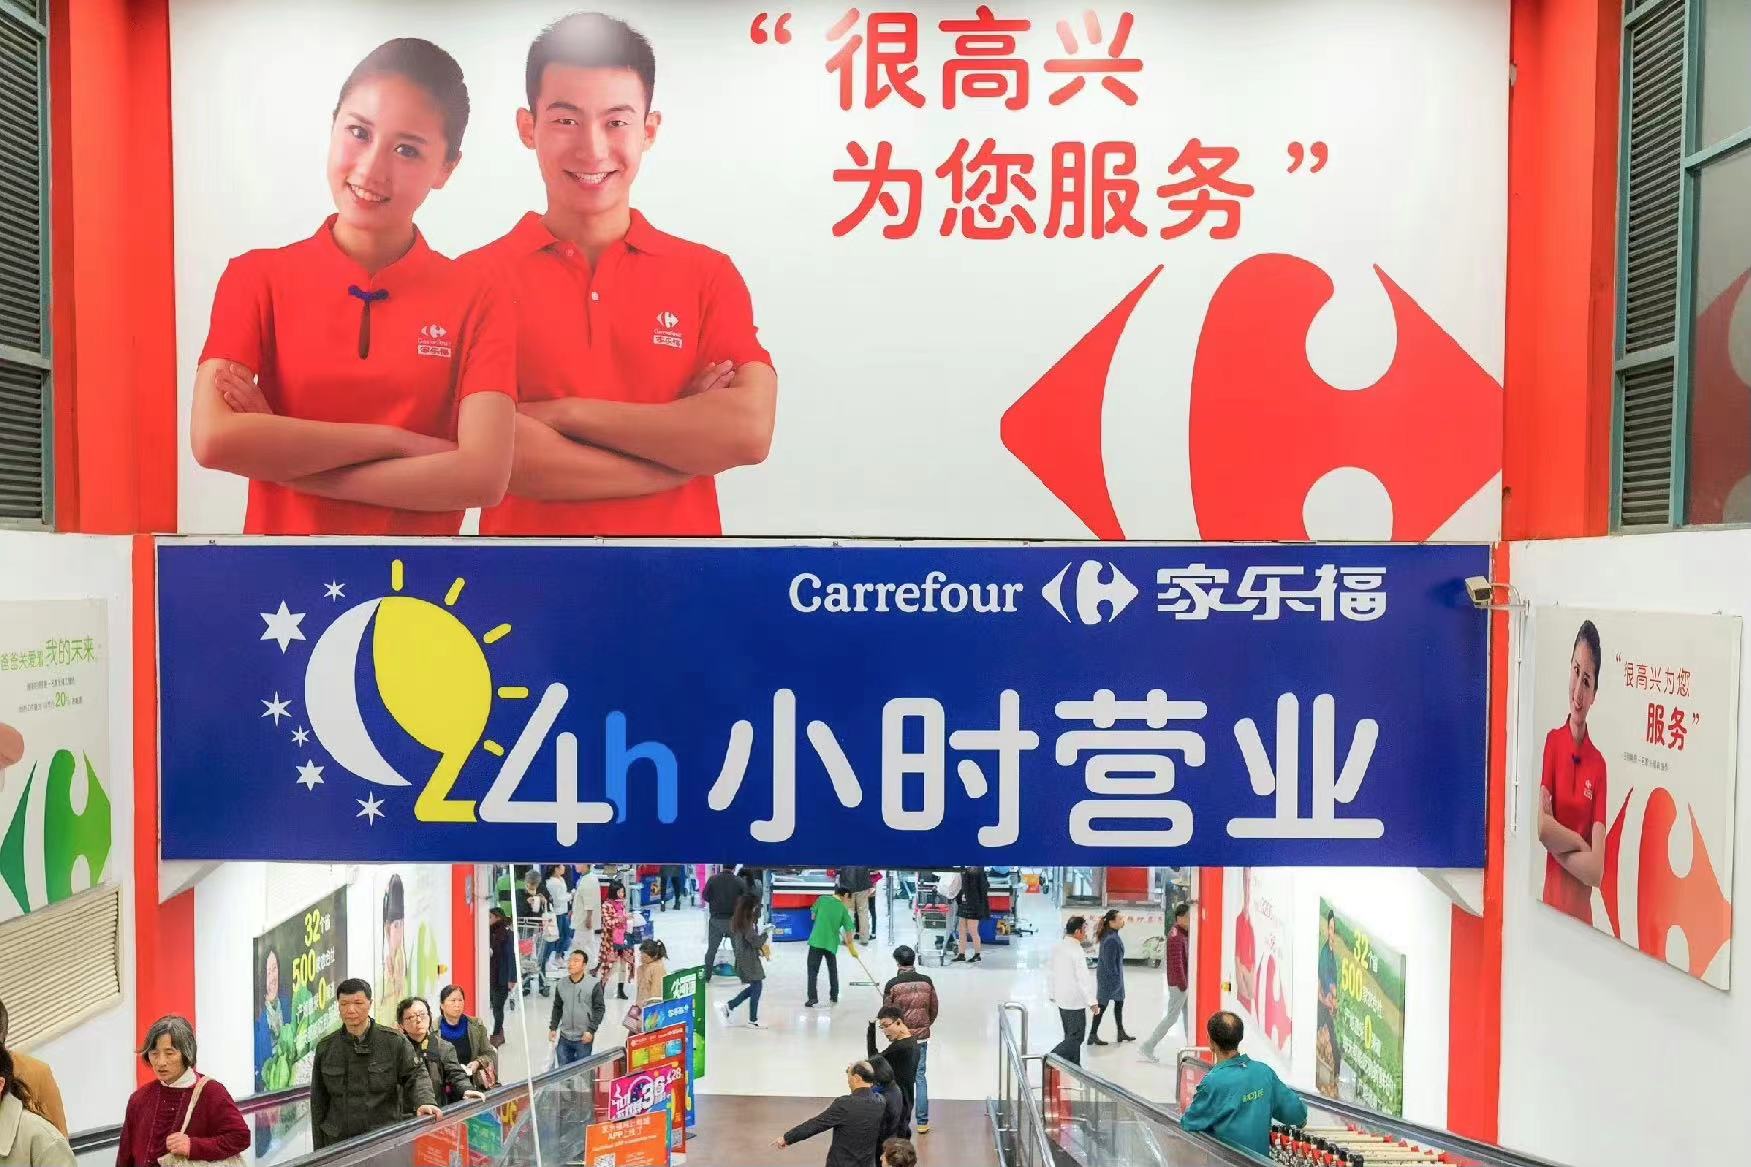 Carrefour Shutters Last Store in Guangzhou Amid Business Challenges